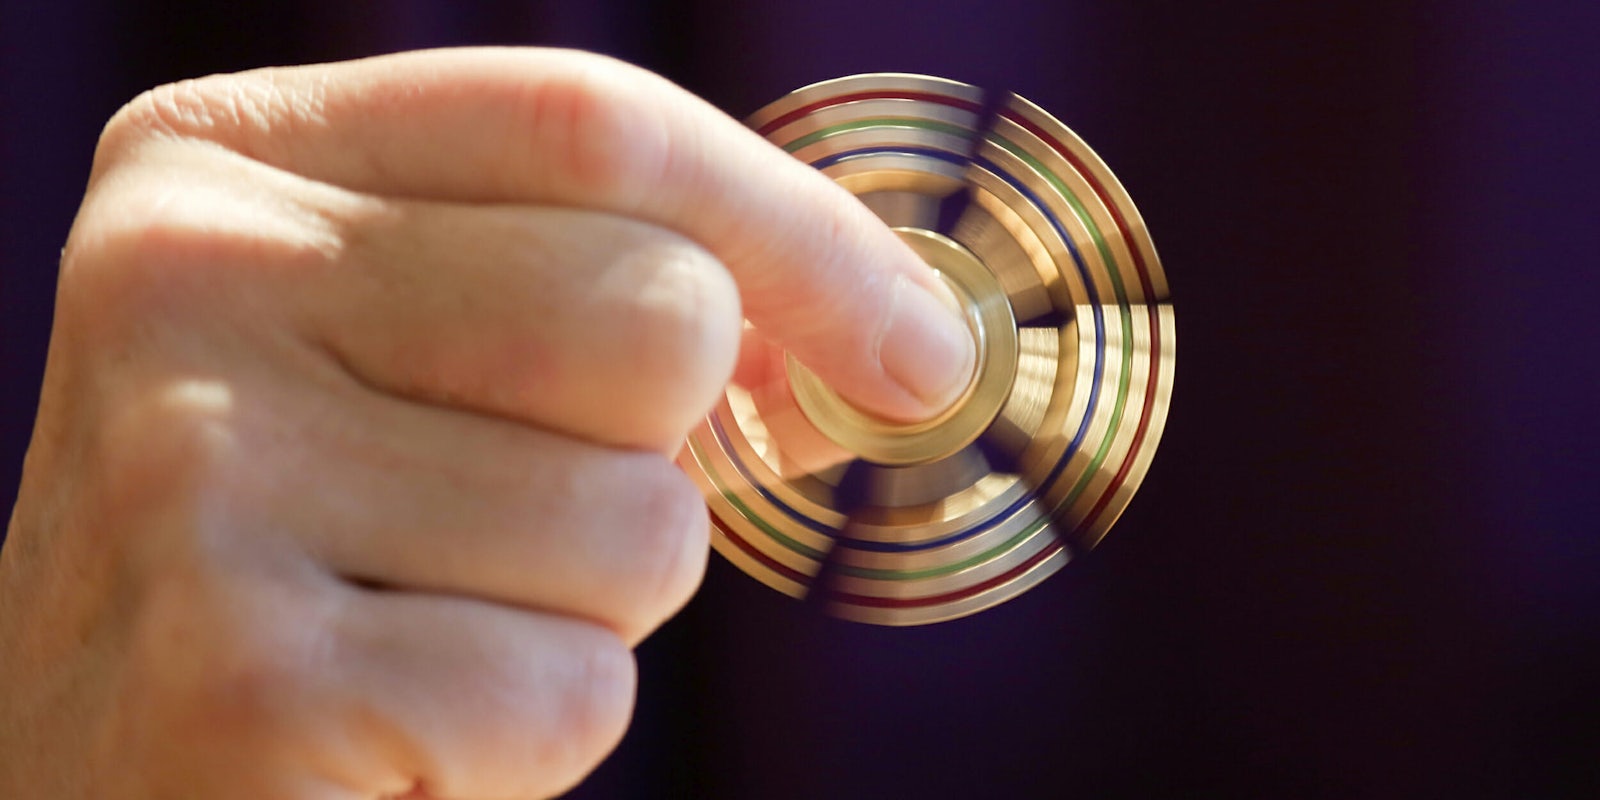 What Is a Fidget Spinner and Why Is It Helpful for Mental Health